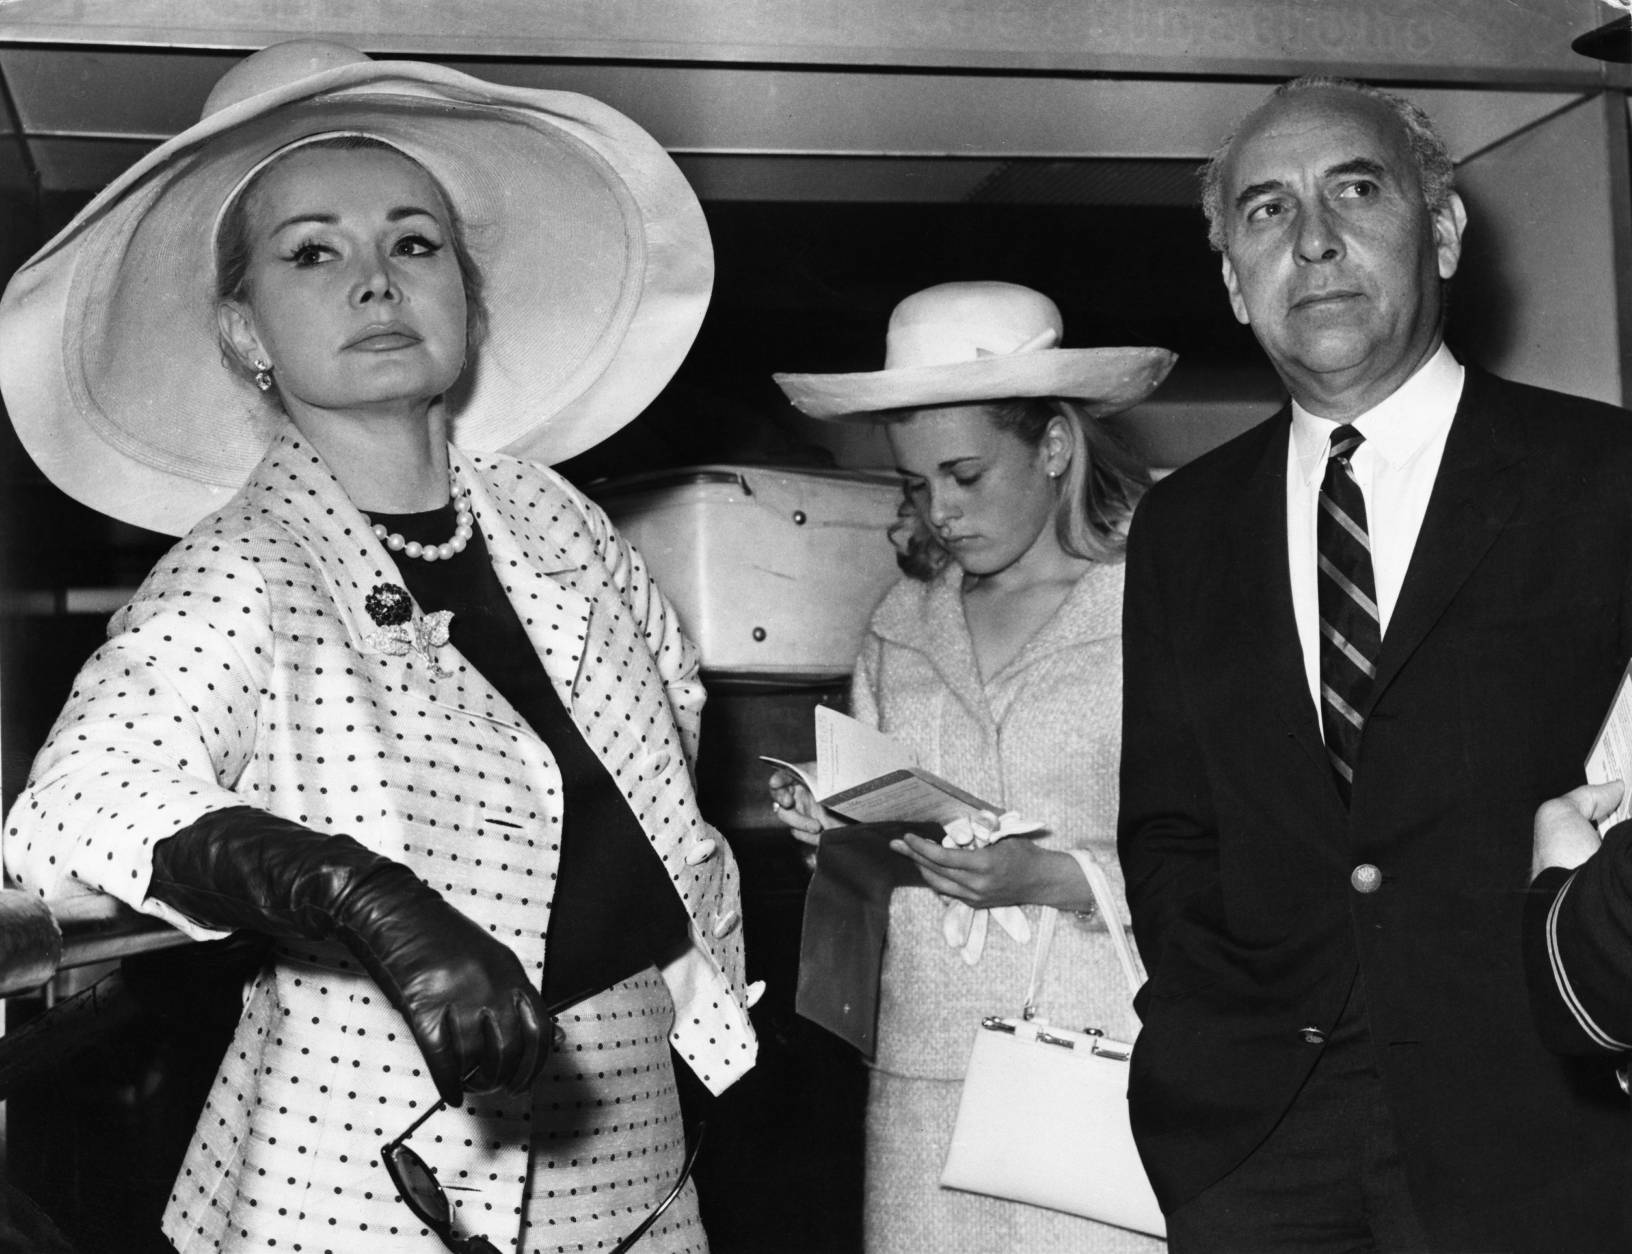 Hungarian-American actress Zsa Zsa Gabor with her husband Herbert Hutner and daughter Francesca Hilton, circa 1965. Gabor, 99, died of a heart attack, CBS confirmed Sunday, Dec. 18, 2016 (Photo by Express/Hulton Archive/Getty Images)